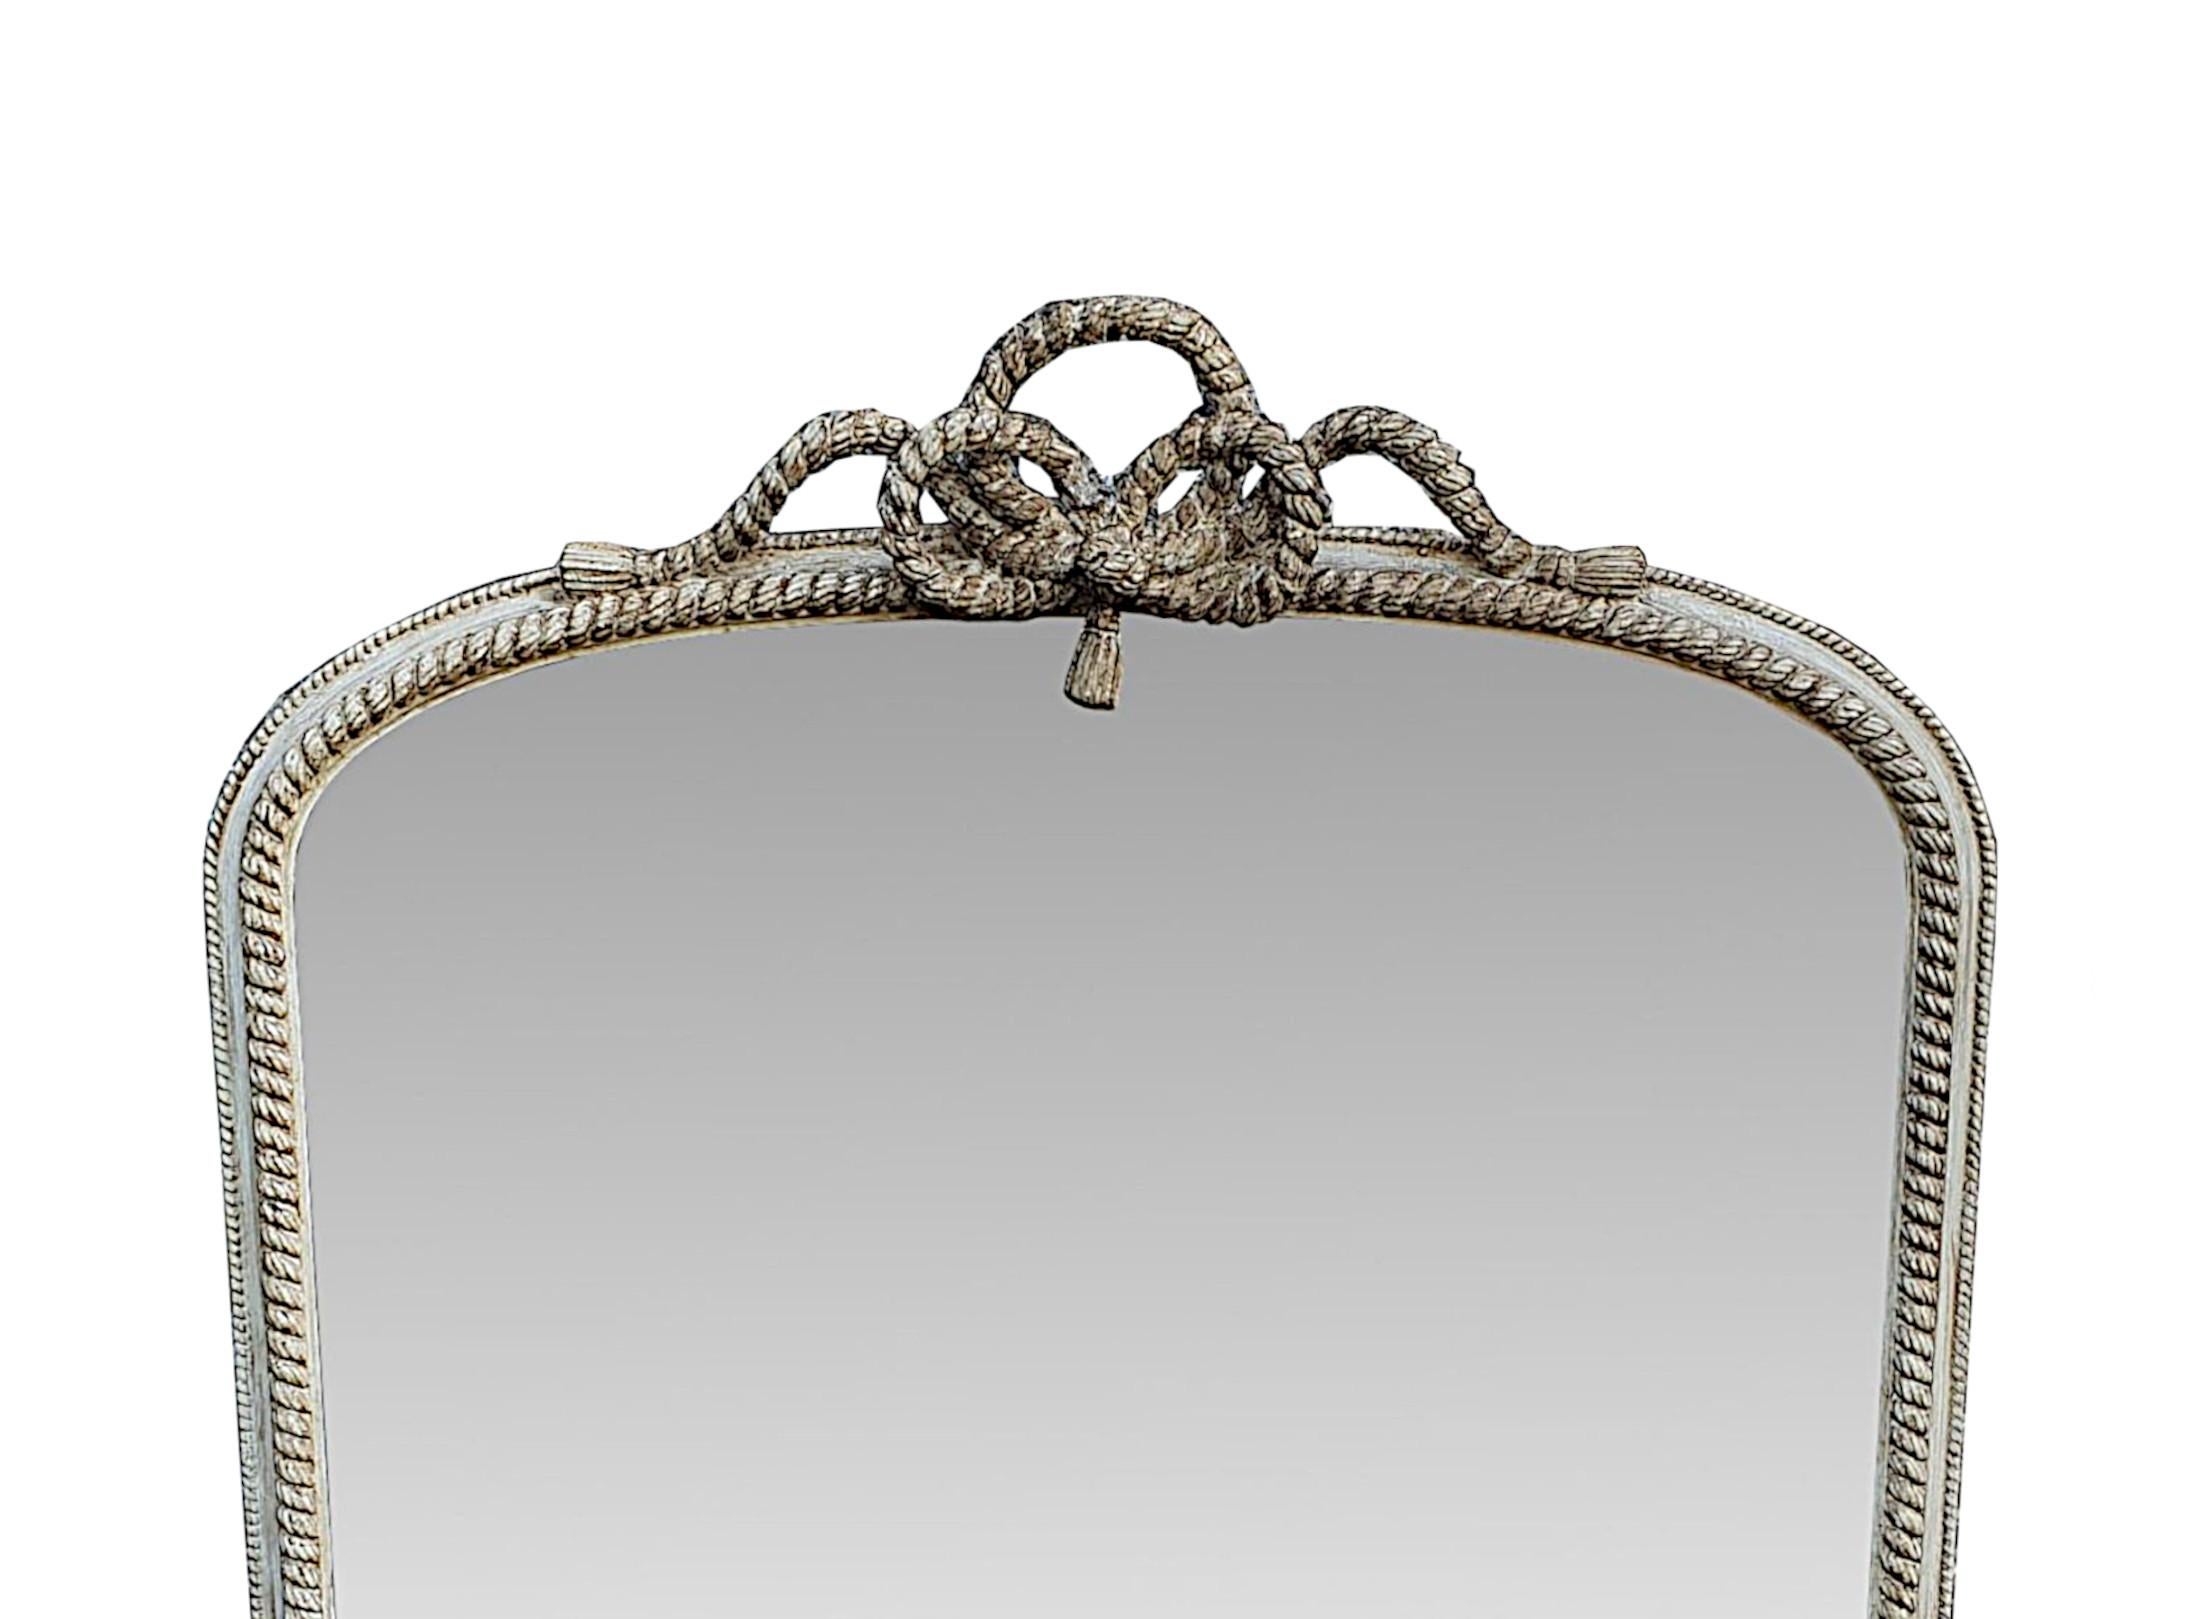 A gorgeous 19th century overmantle mirror of large proportions, beautifully restored in a distressed paint finish. The original mercury glass mirror plate with some mottling, is set within a finely hand carved and moulded giltwood frame with beaded